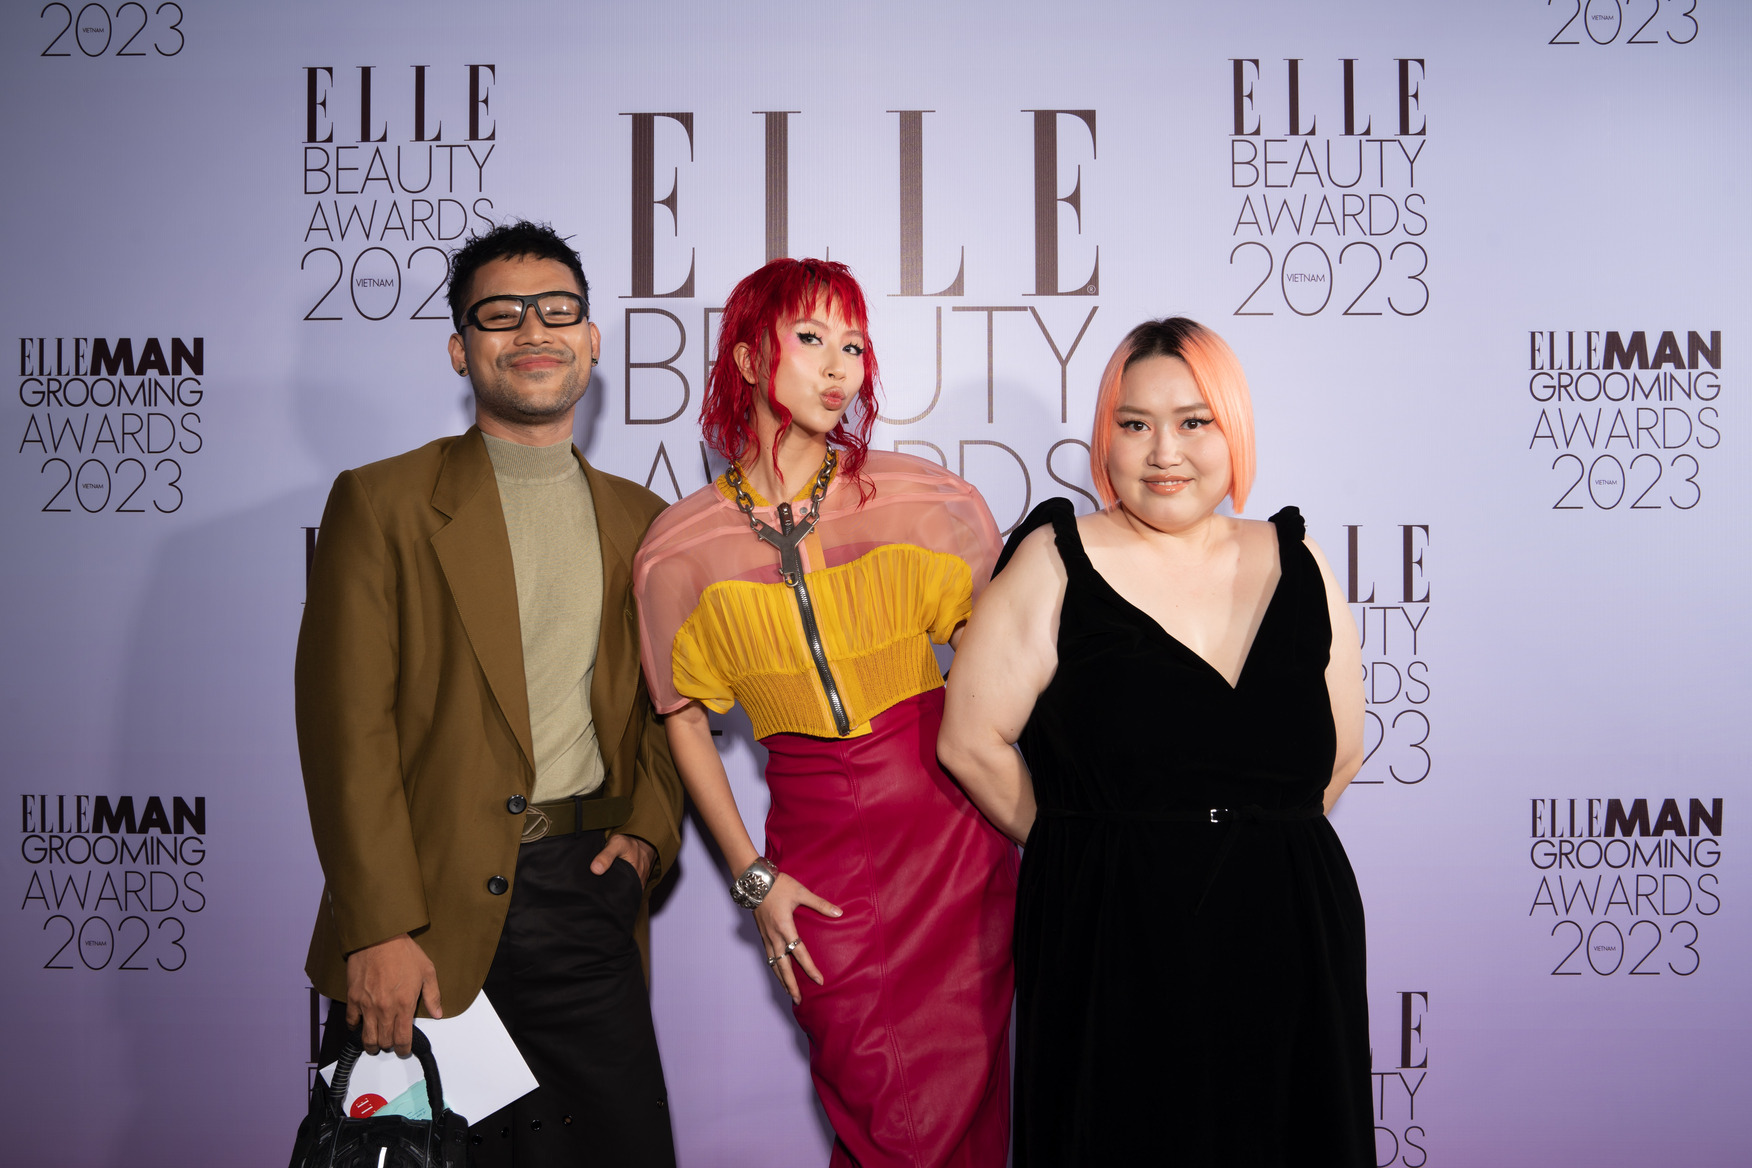 Immerse yourself in colorful red carpet outfits in the "starry night" Elle beauty awards 2023